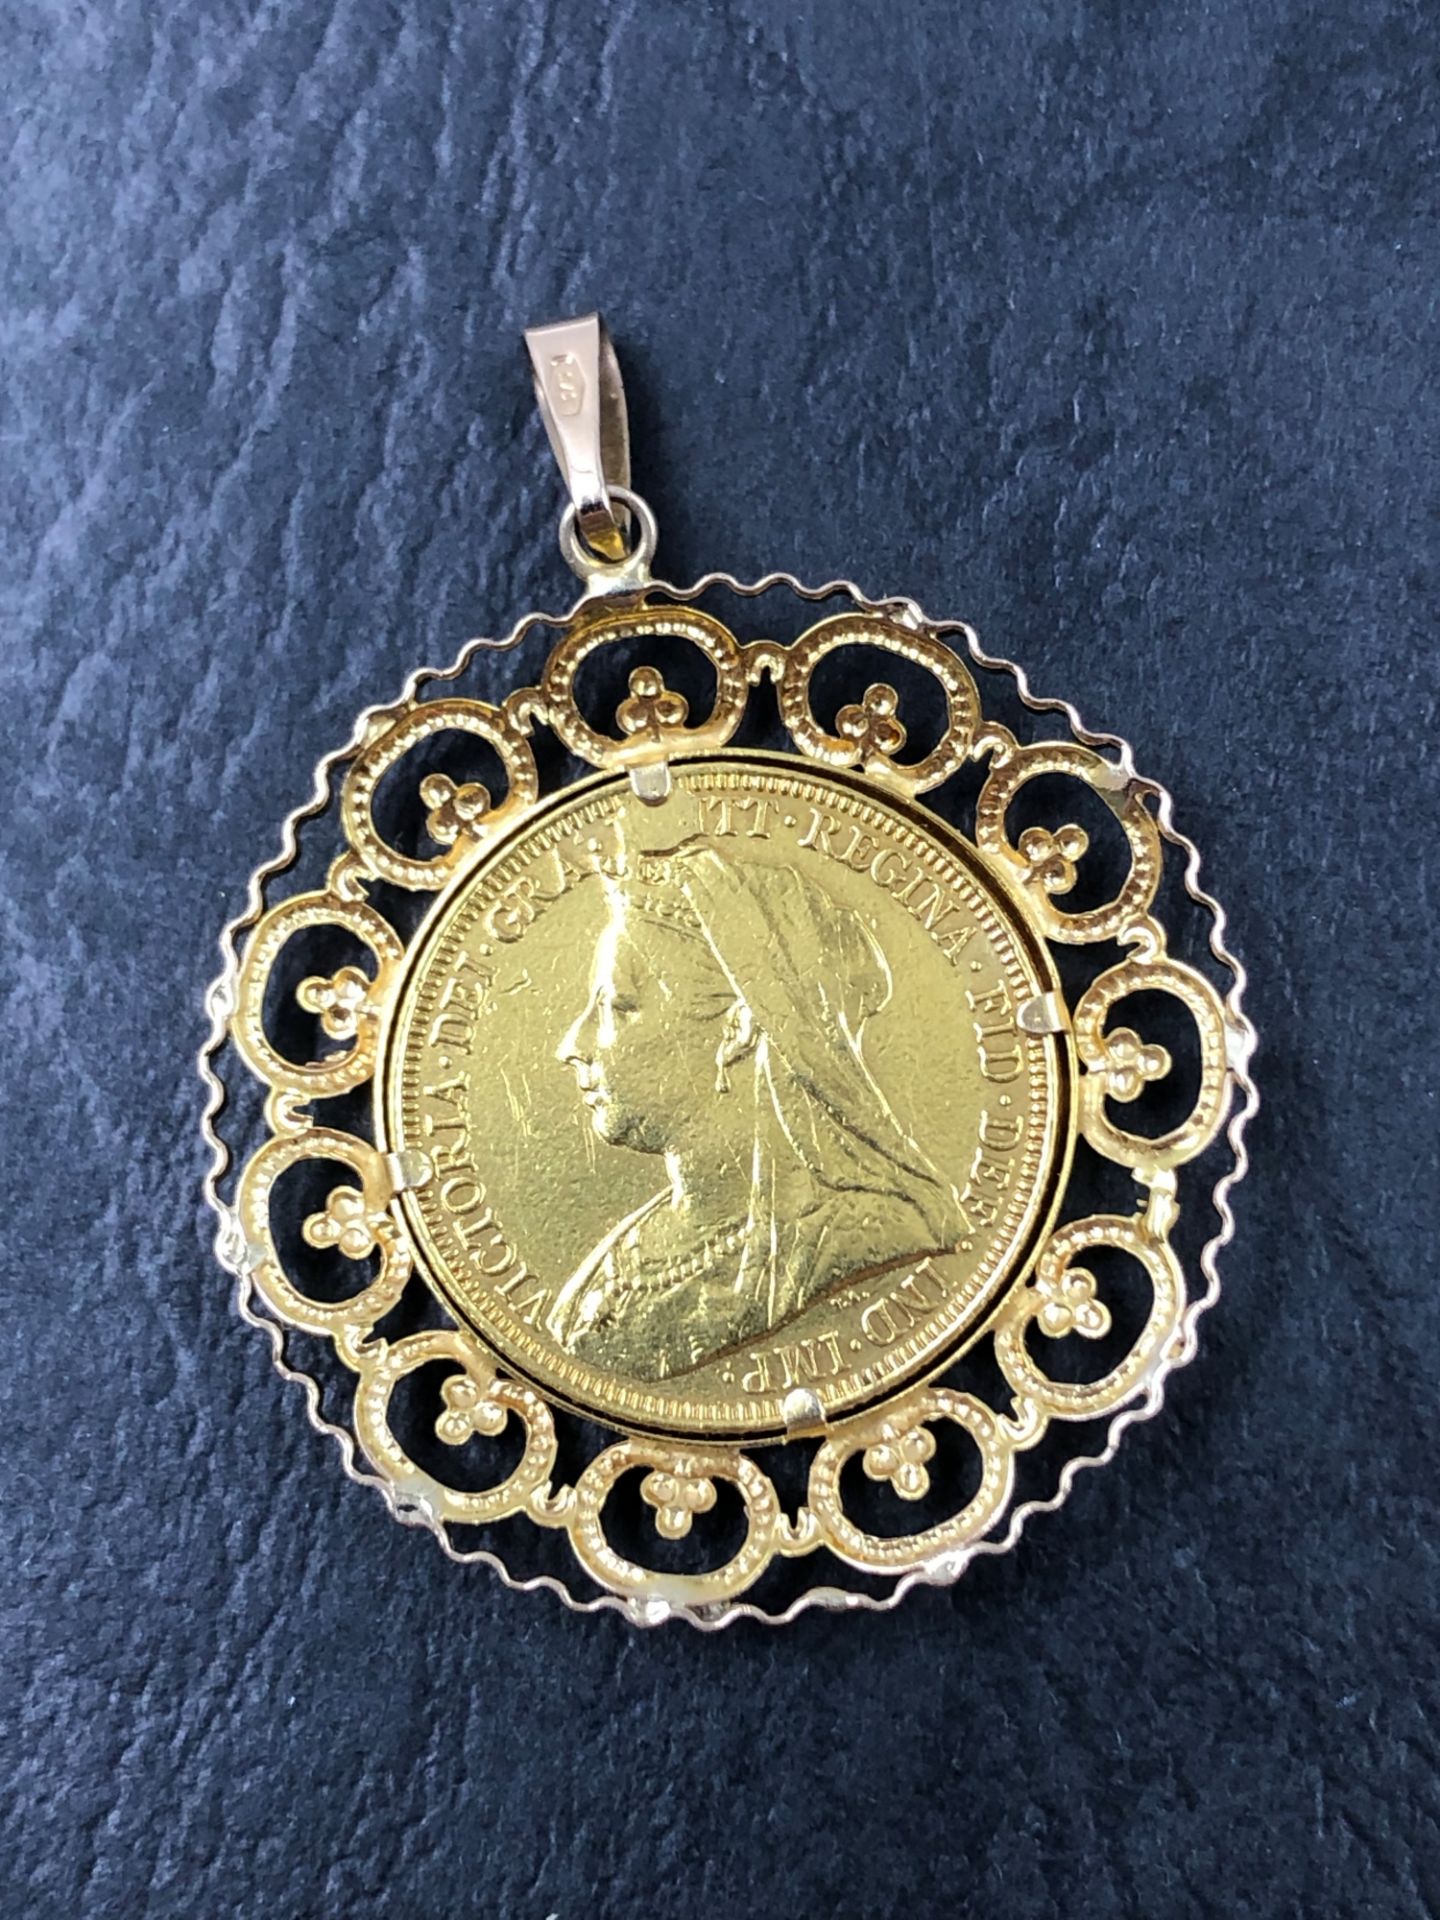 A VICTORIAN 22ct GOLD FULL SOVEREIGN DATED 1895 MELBOURNE MINT SET IN AN ASSESSED 9ct GOLD PENDANT - Image 2 of 2